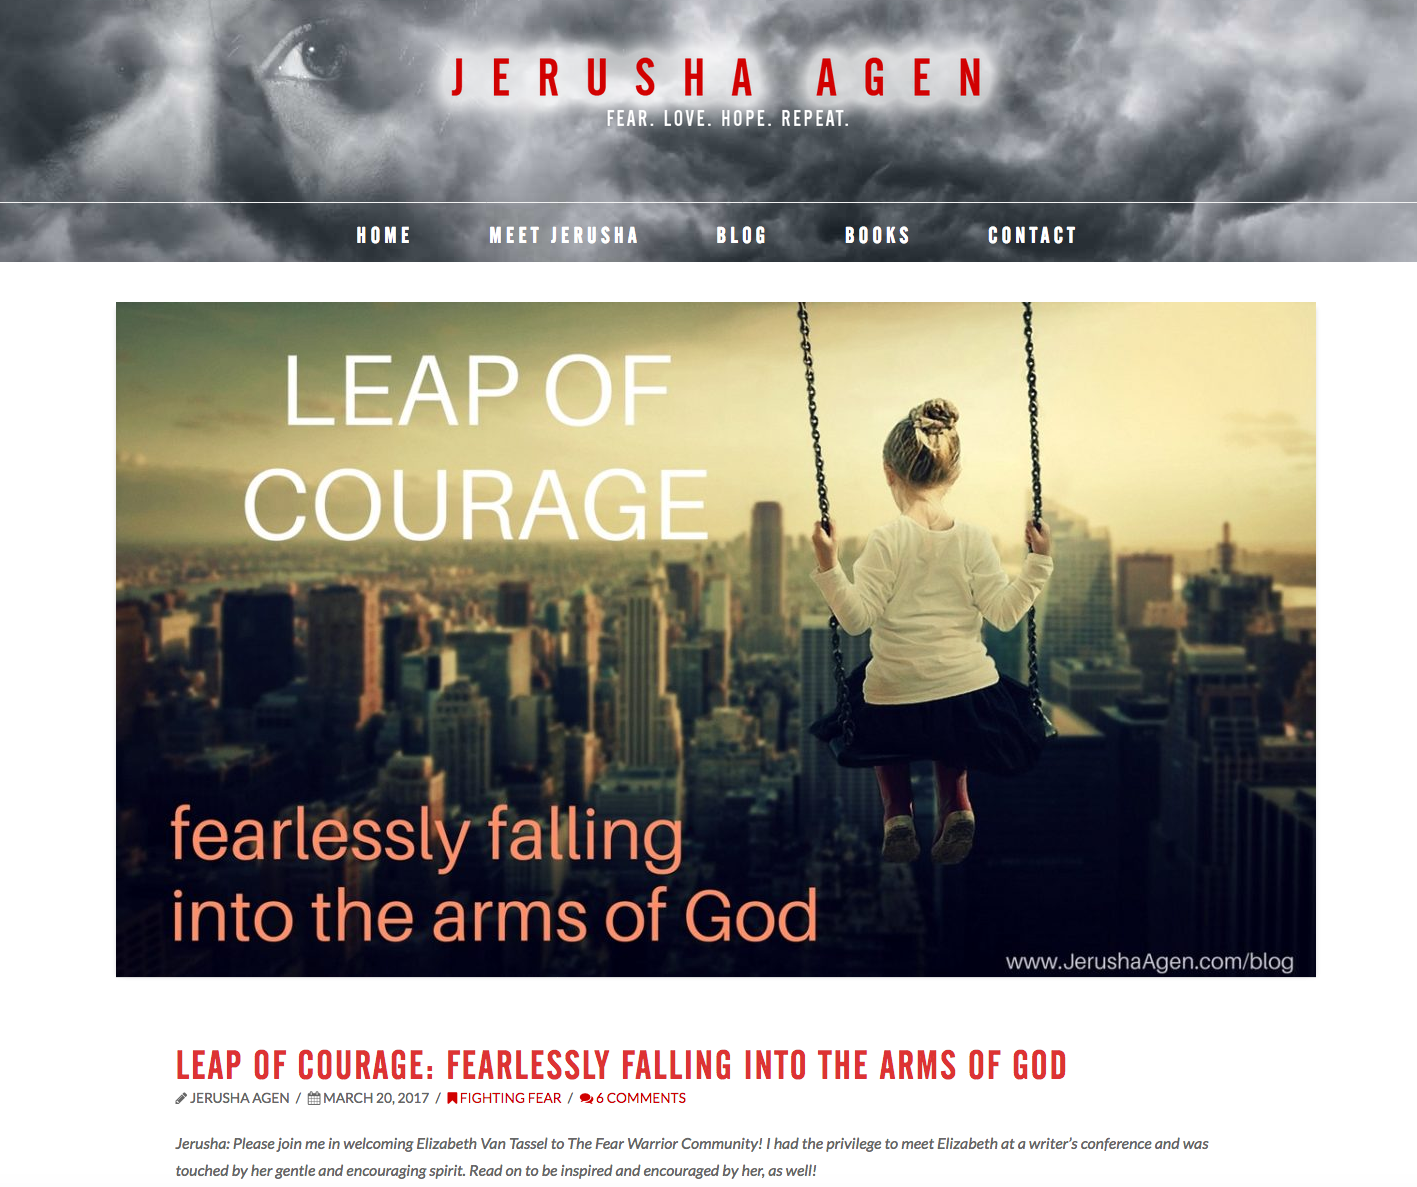 Resilience Expert Elizabeth Van Tassel appearing on the Fear Warrior Blog http://jerushaagen.com/leap-of-courage-fearlessly-falling-into-the-arms-of-god/